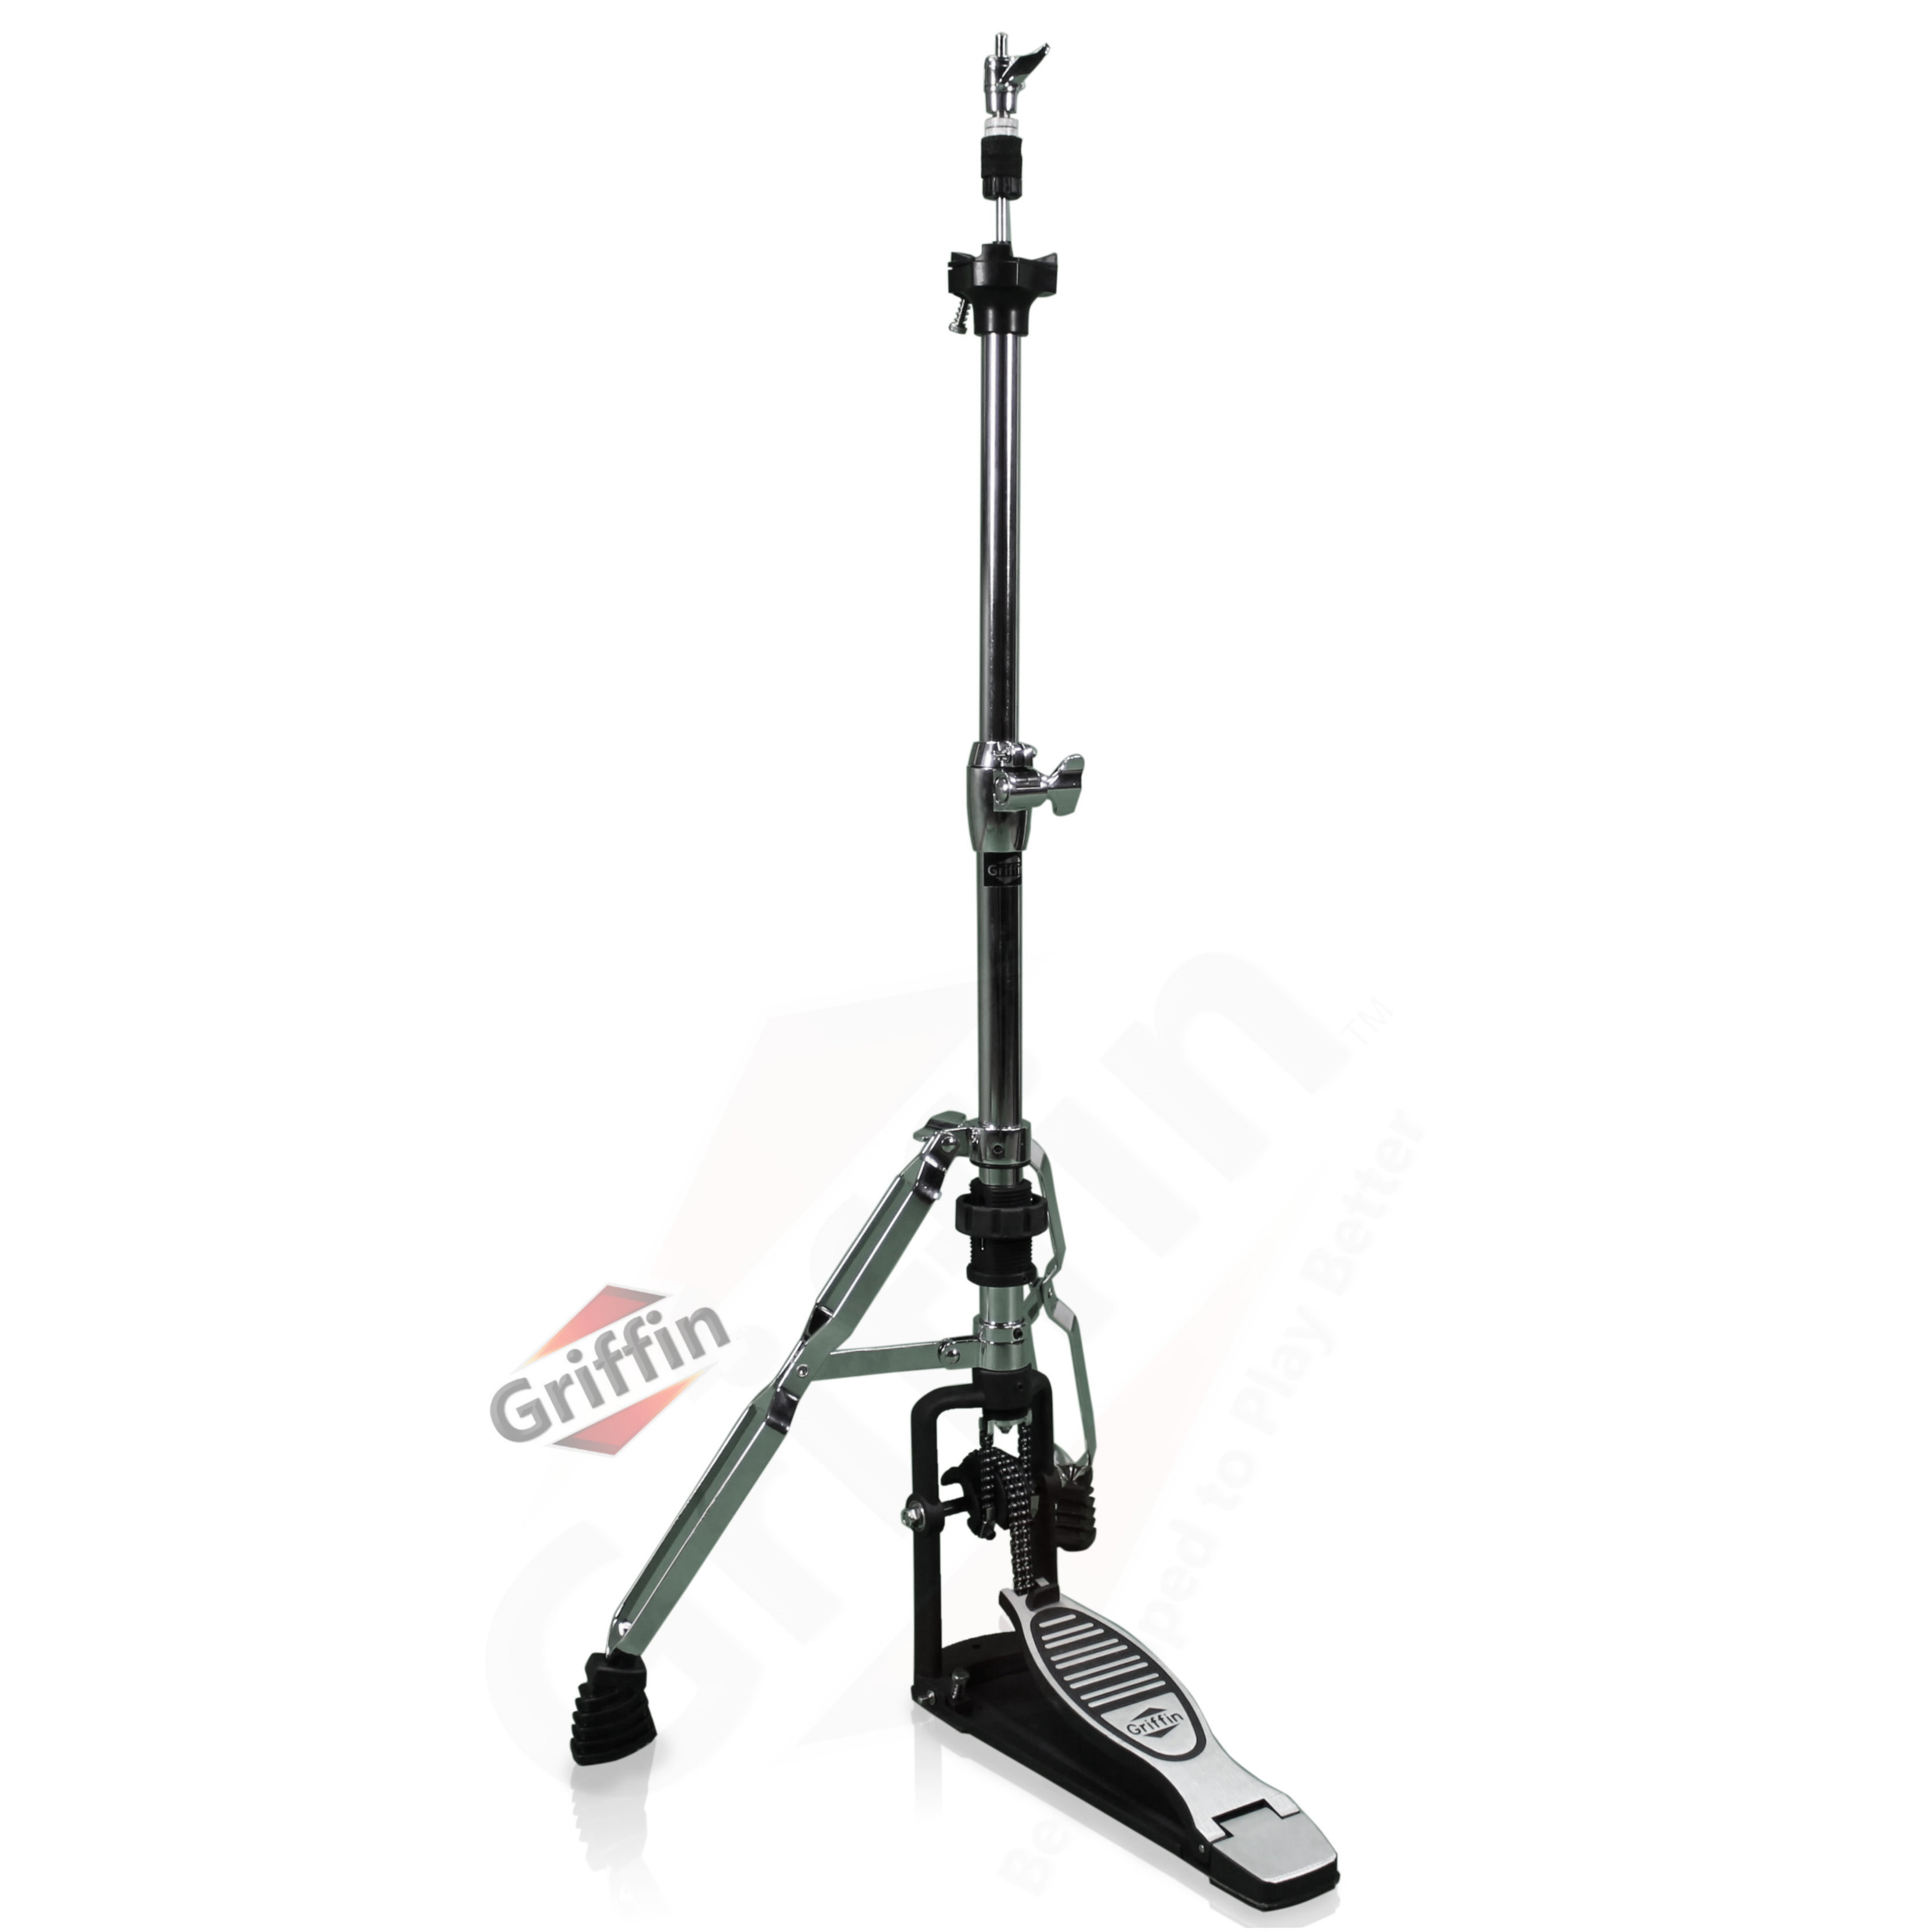 Griffin 2 Leg Hi-hat Stand – Percussion No Leg High Hat Pedal Cymbal Drum Mount